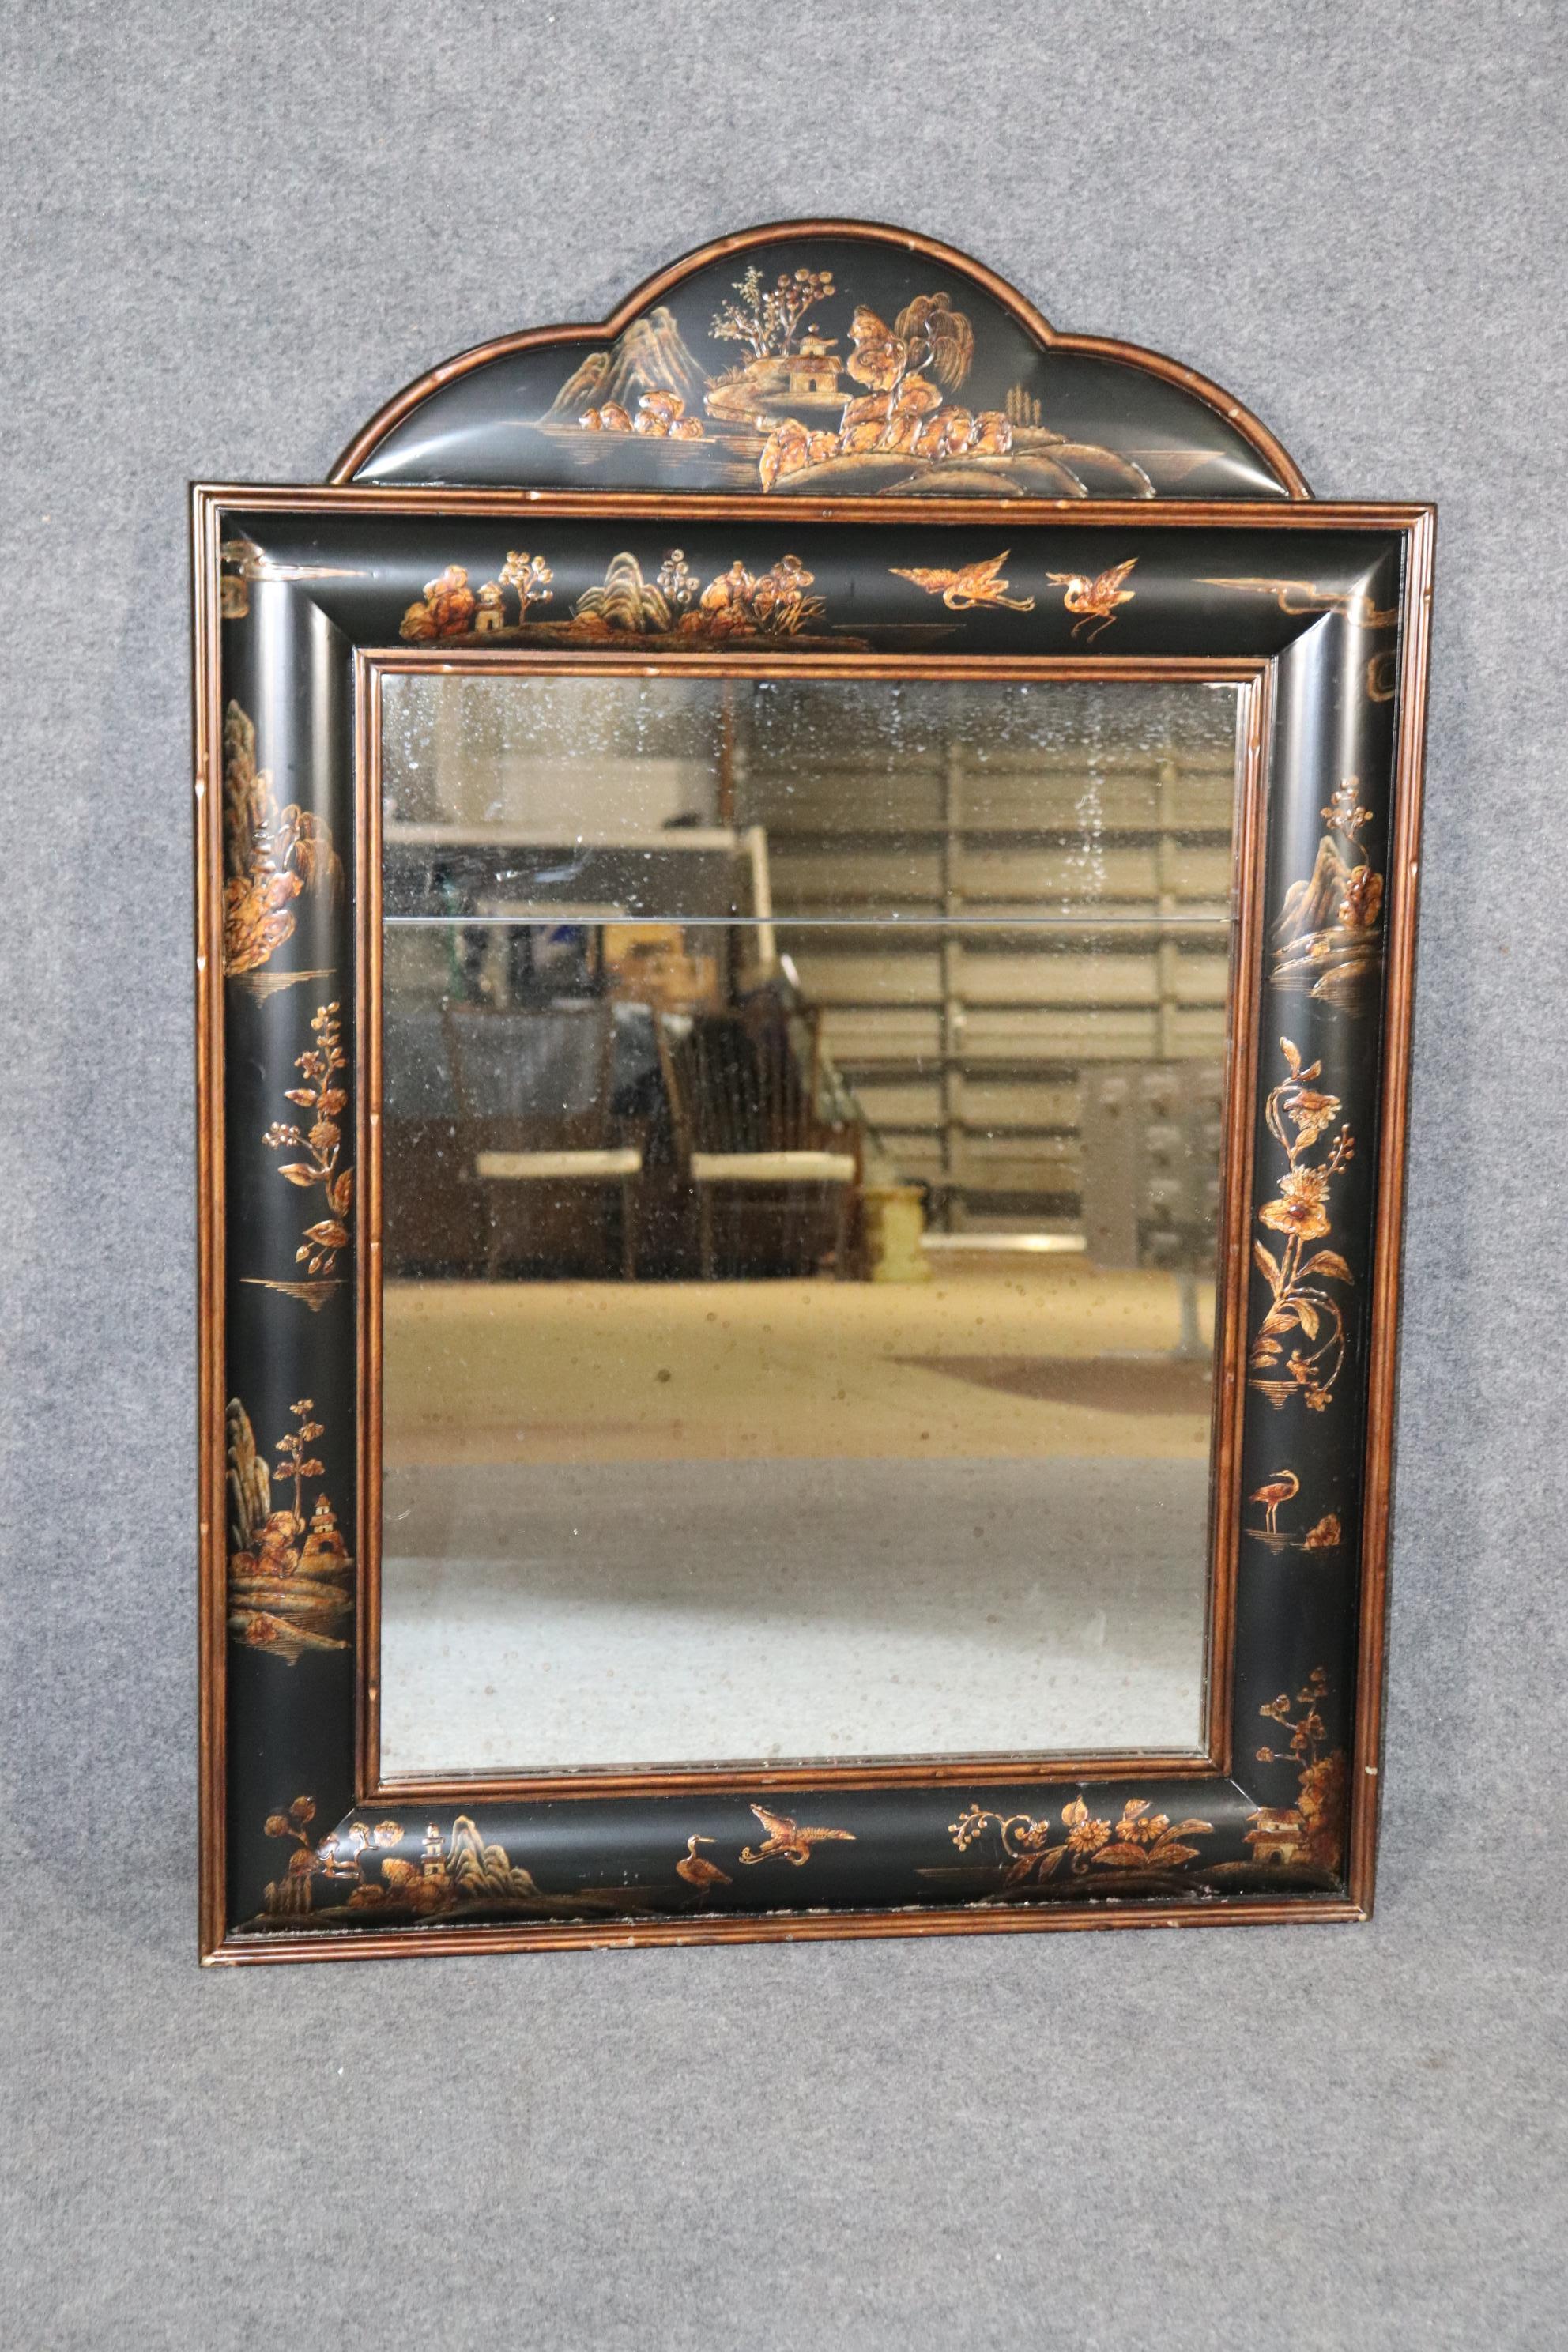 This is a gorgeous mirror done in authentic hand-painted raised chinoiserie paint decoration. The mirror is fitted with an antique aged patina glass and has two panes of glass the way the antique 18th century mirrors were often done. The mirror